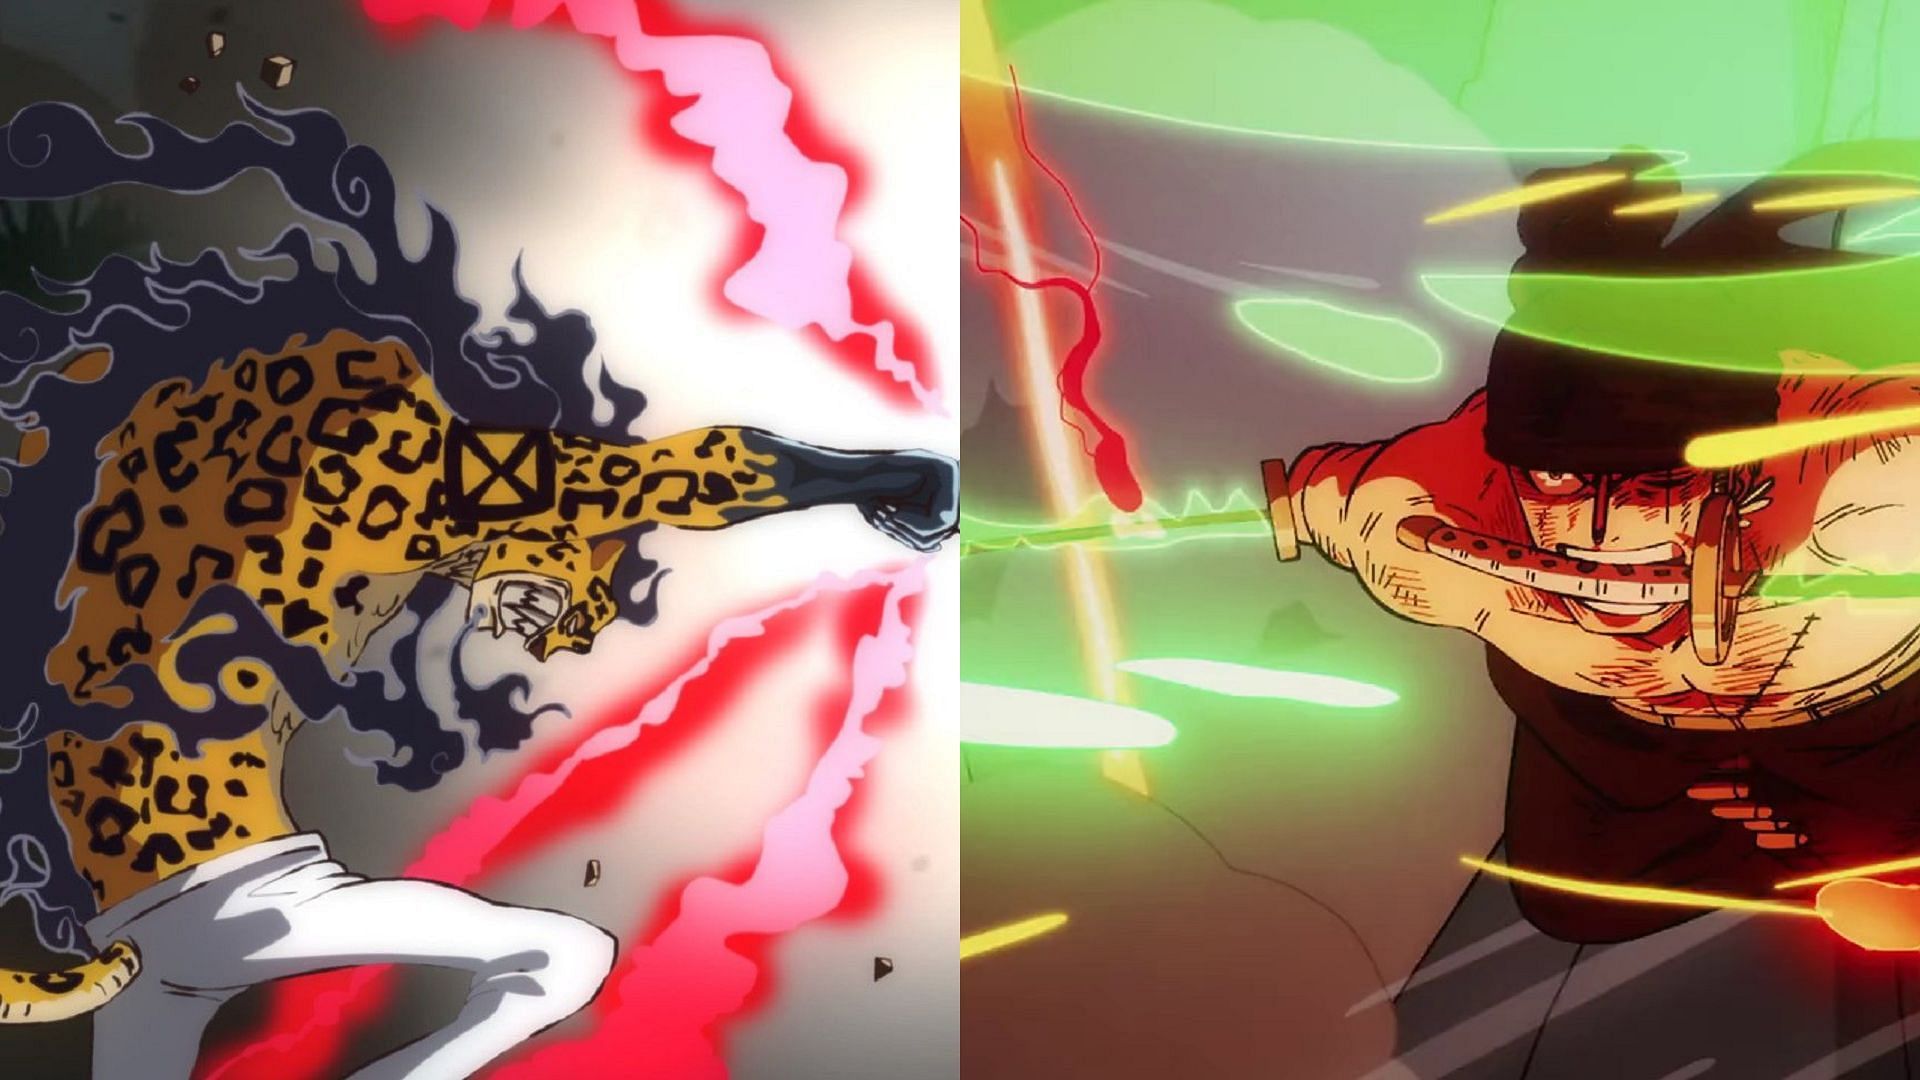 Lucci and Zoro in their strongest forms as seen in One Piece (Image via Toei Animation, One Piece)